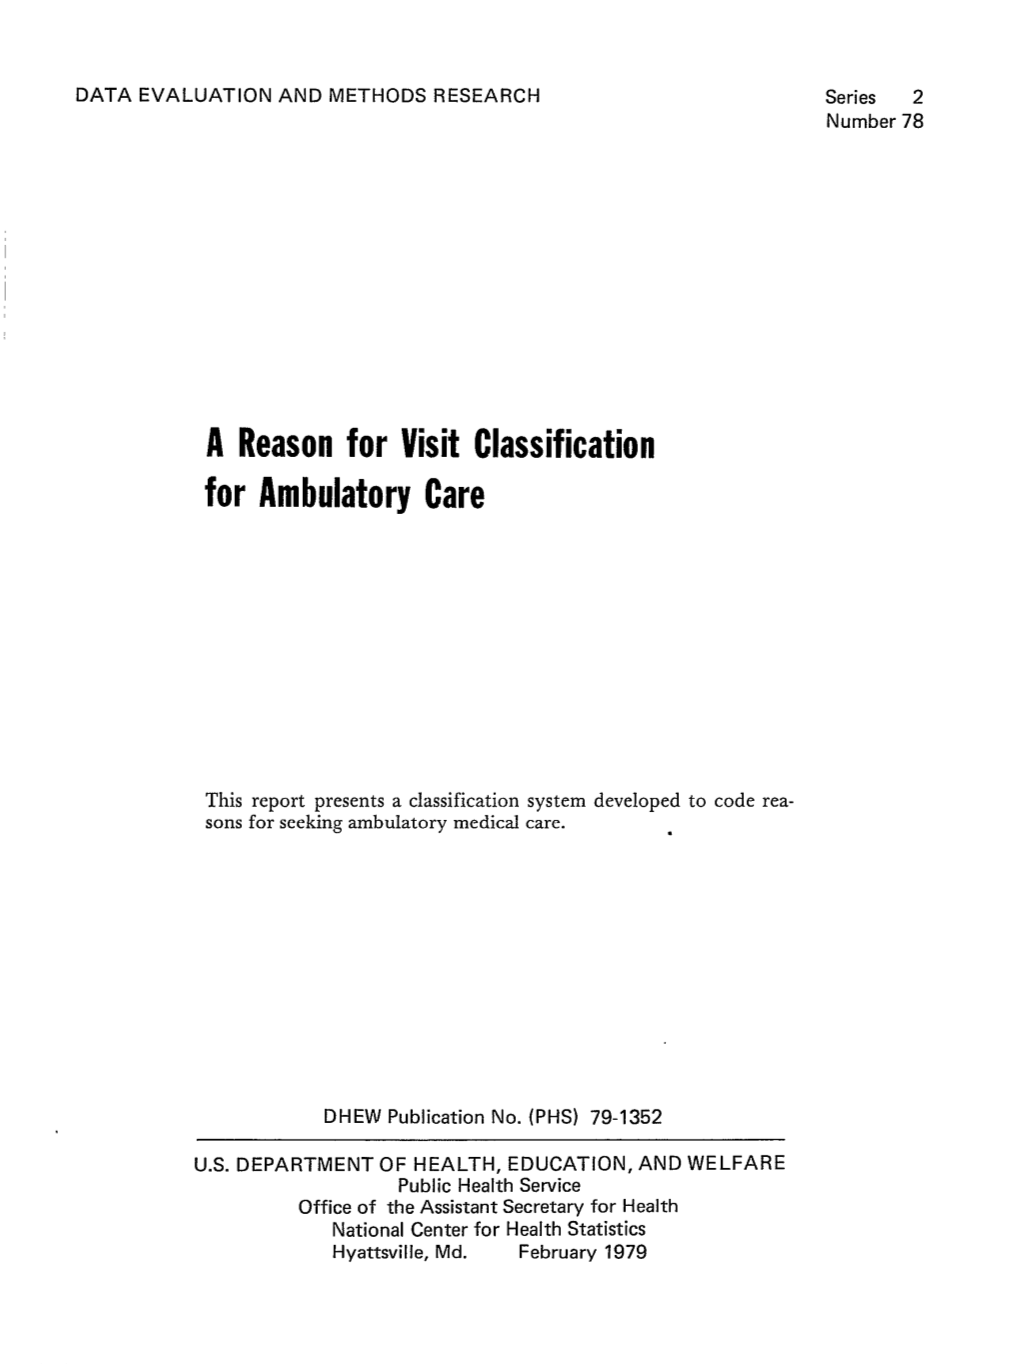 A Reason for Visit Classification for Ambulatory Care